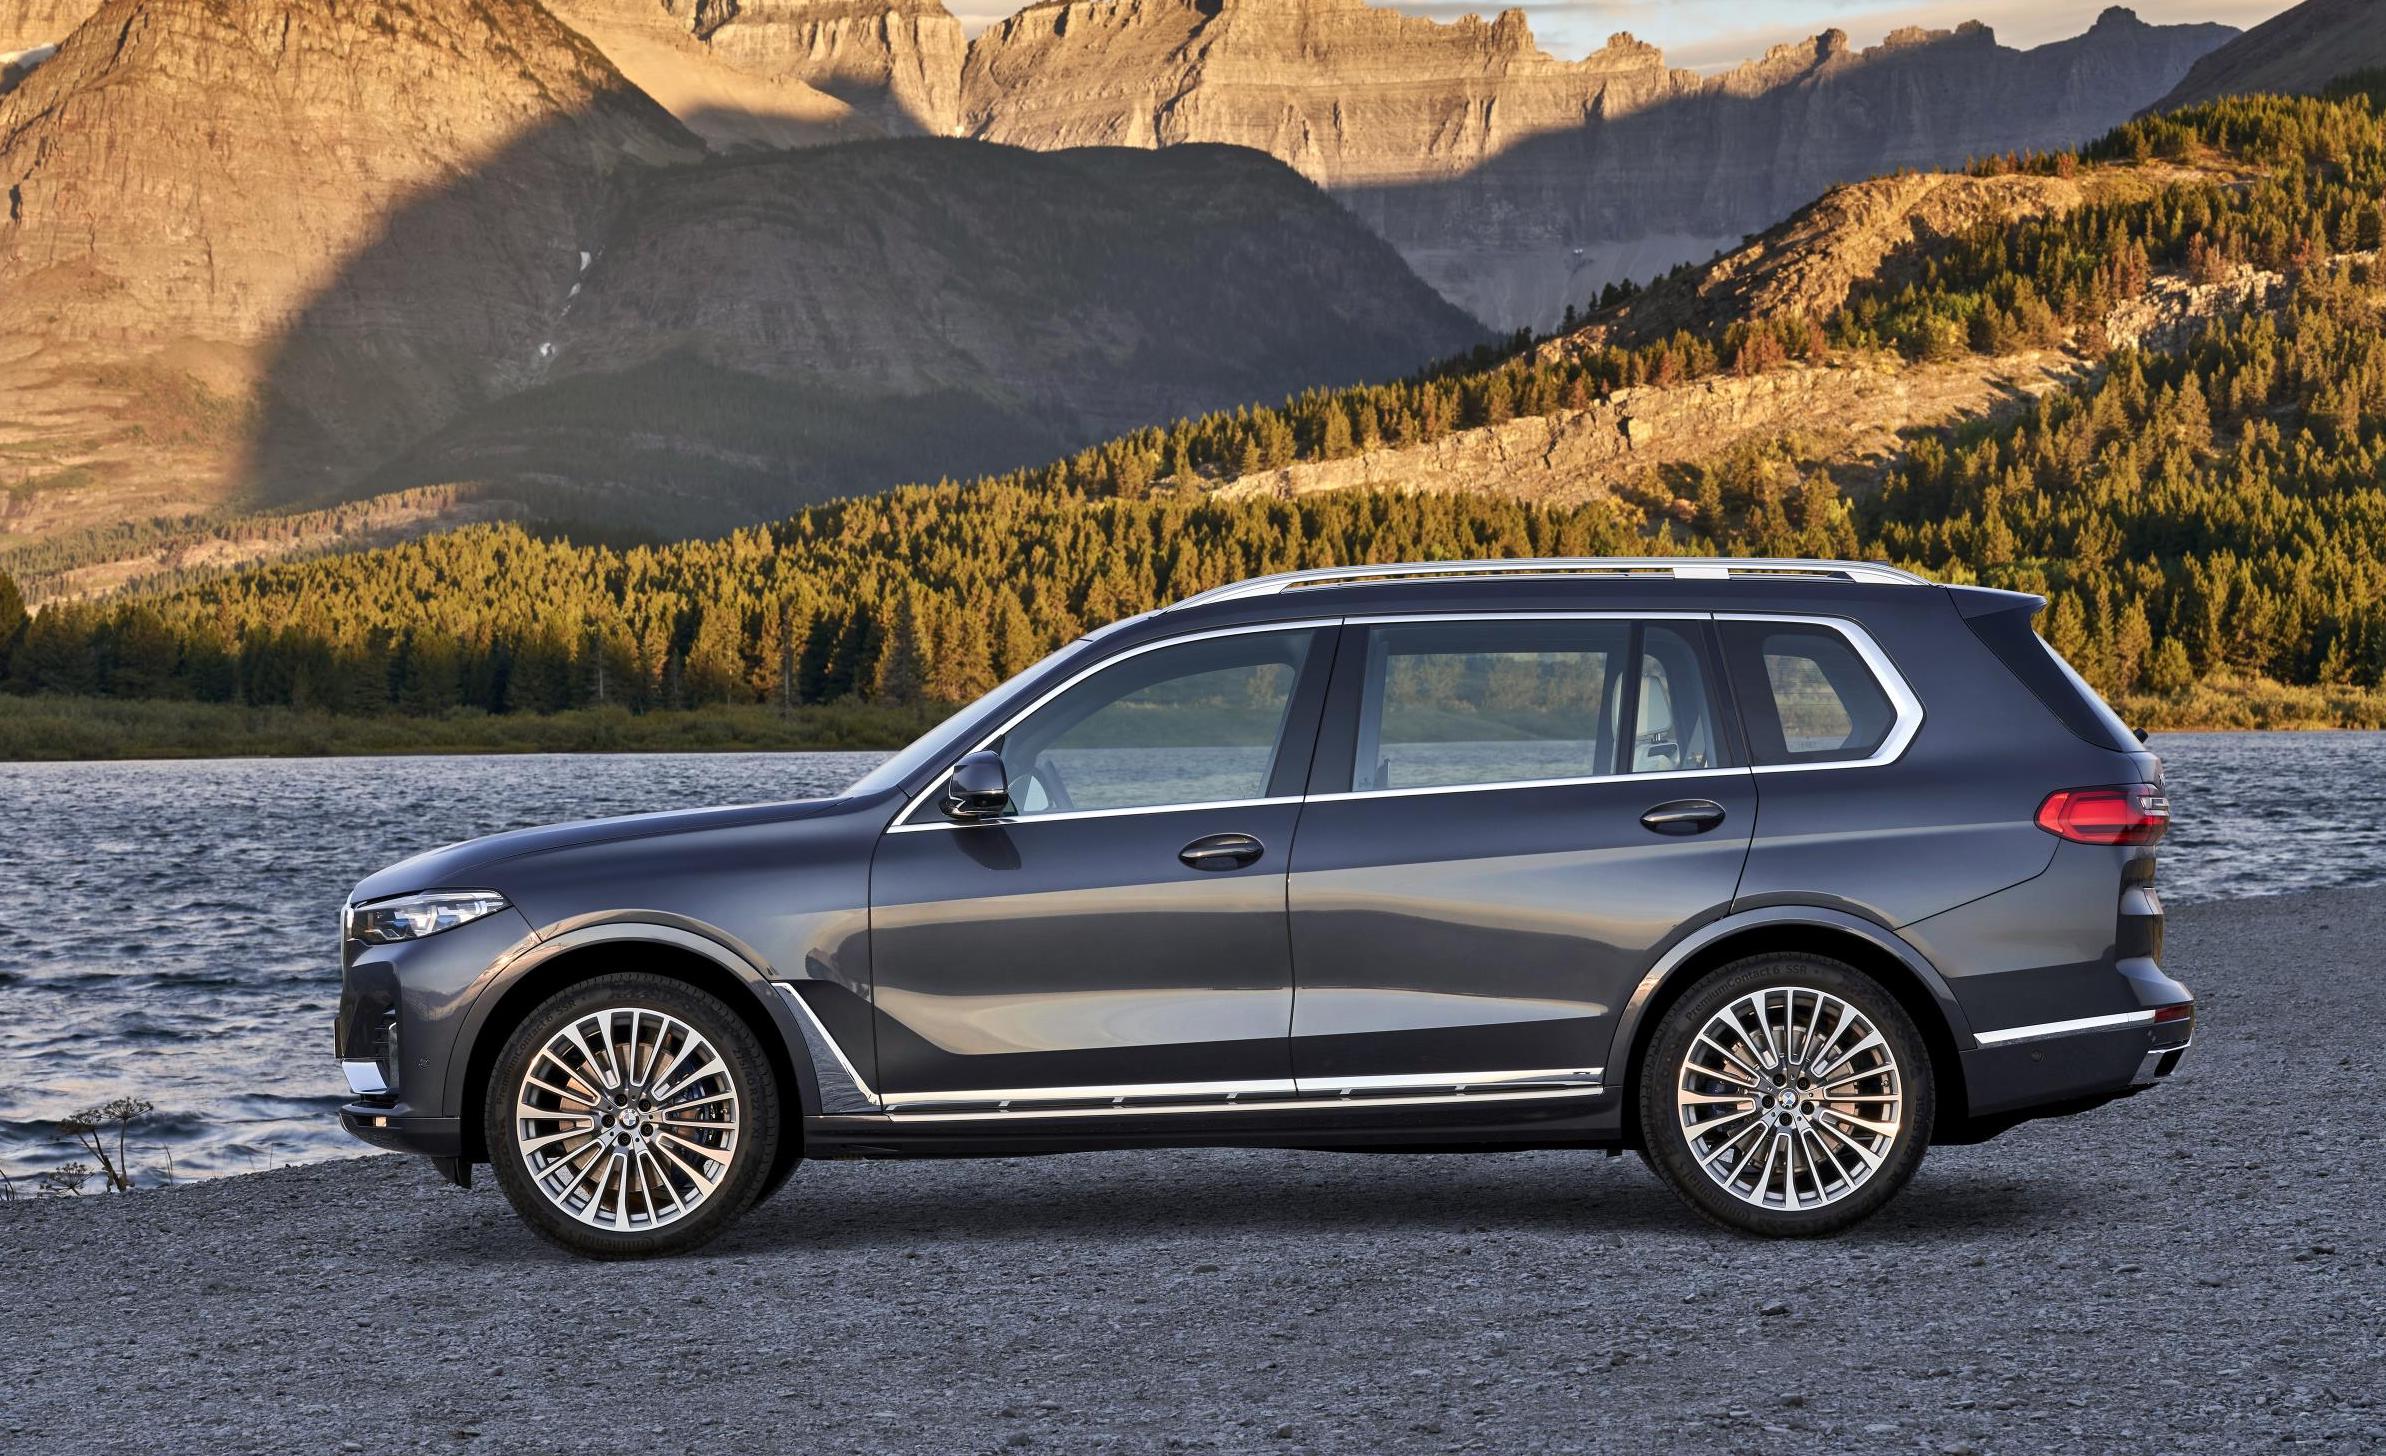 BMW X7 on sale in Australia in May, from $119,900 - PerformanceDrive